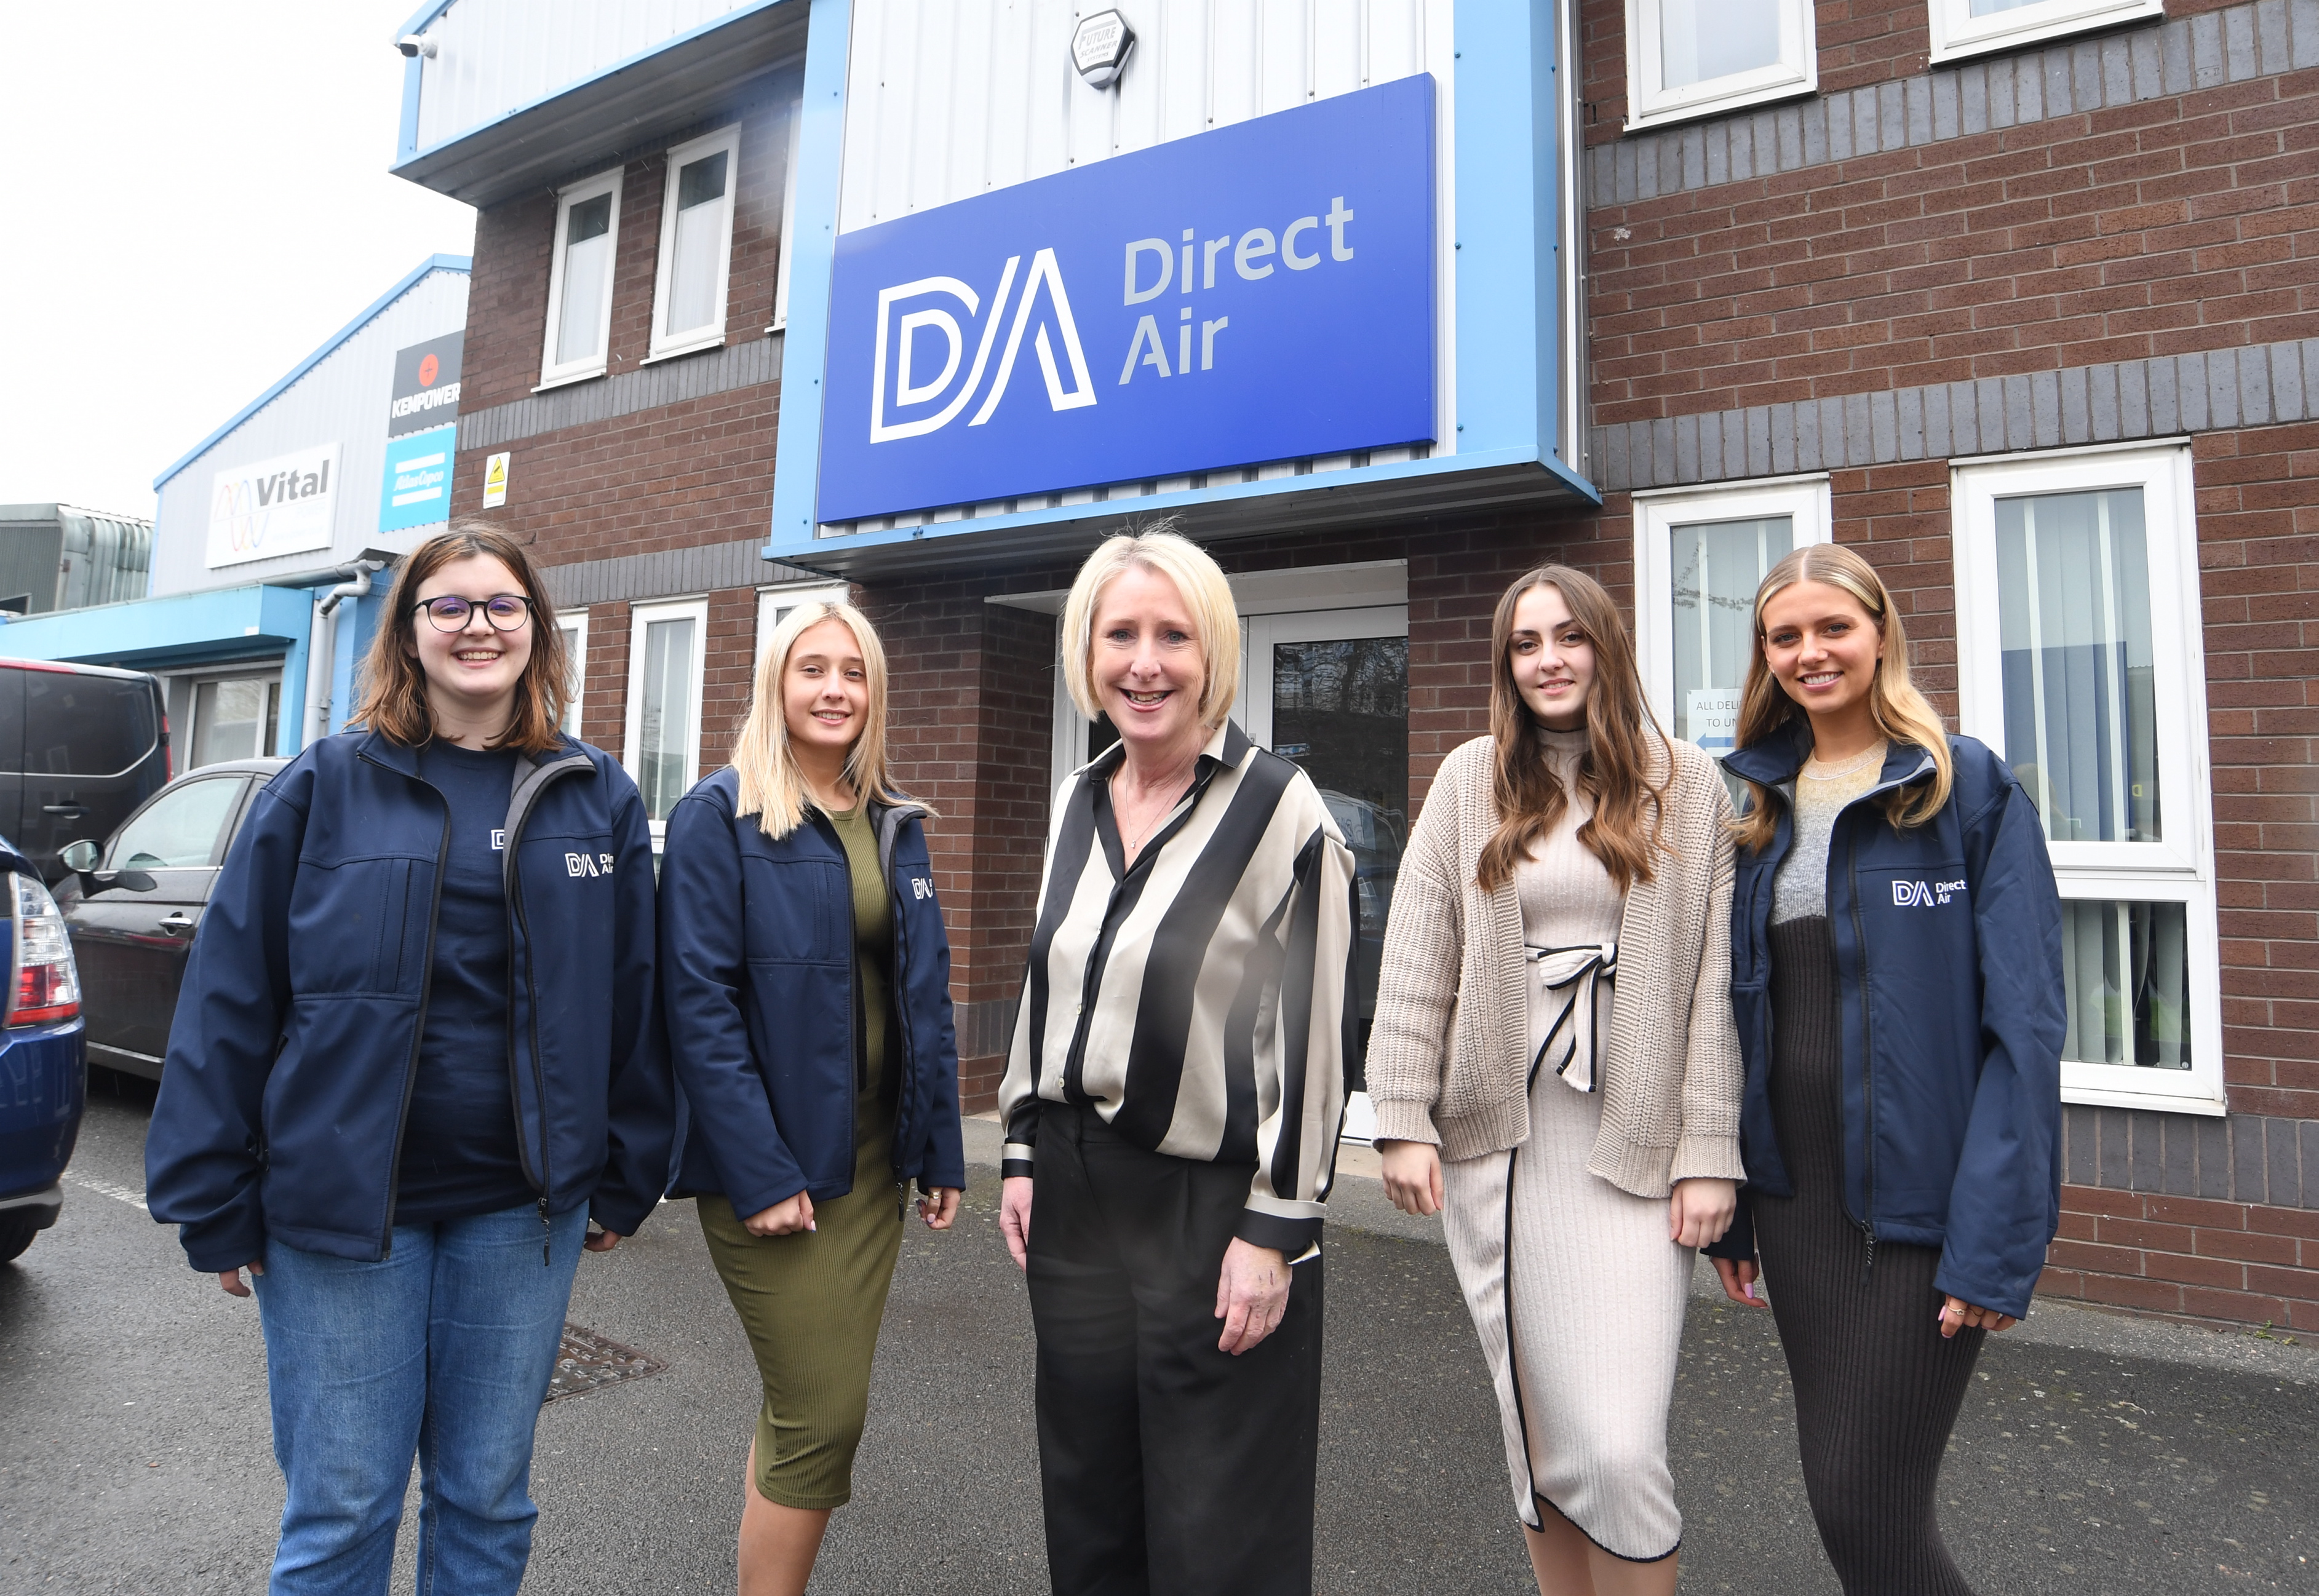 Midlands air firm expands footprint on 30th anniversary